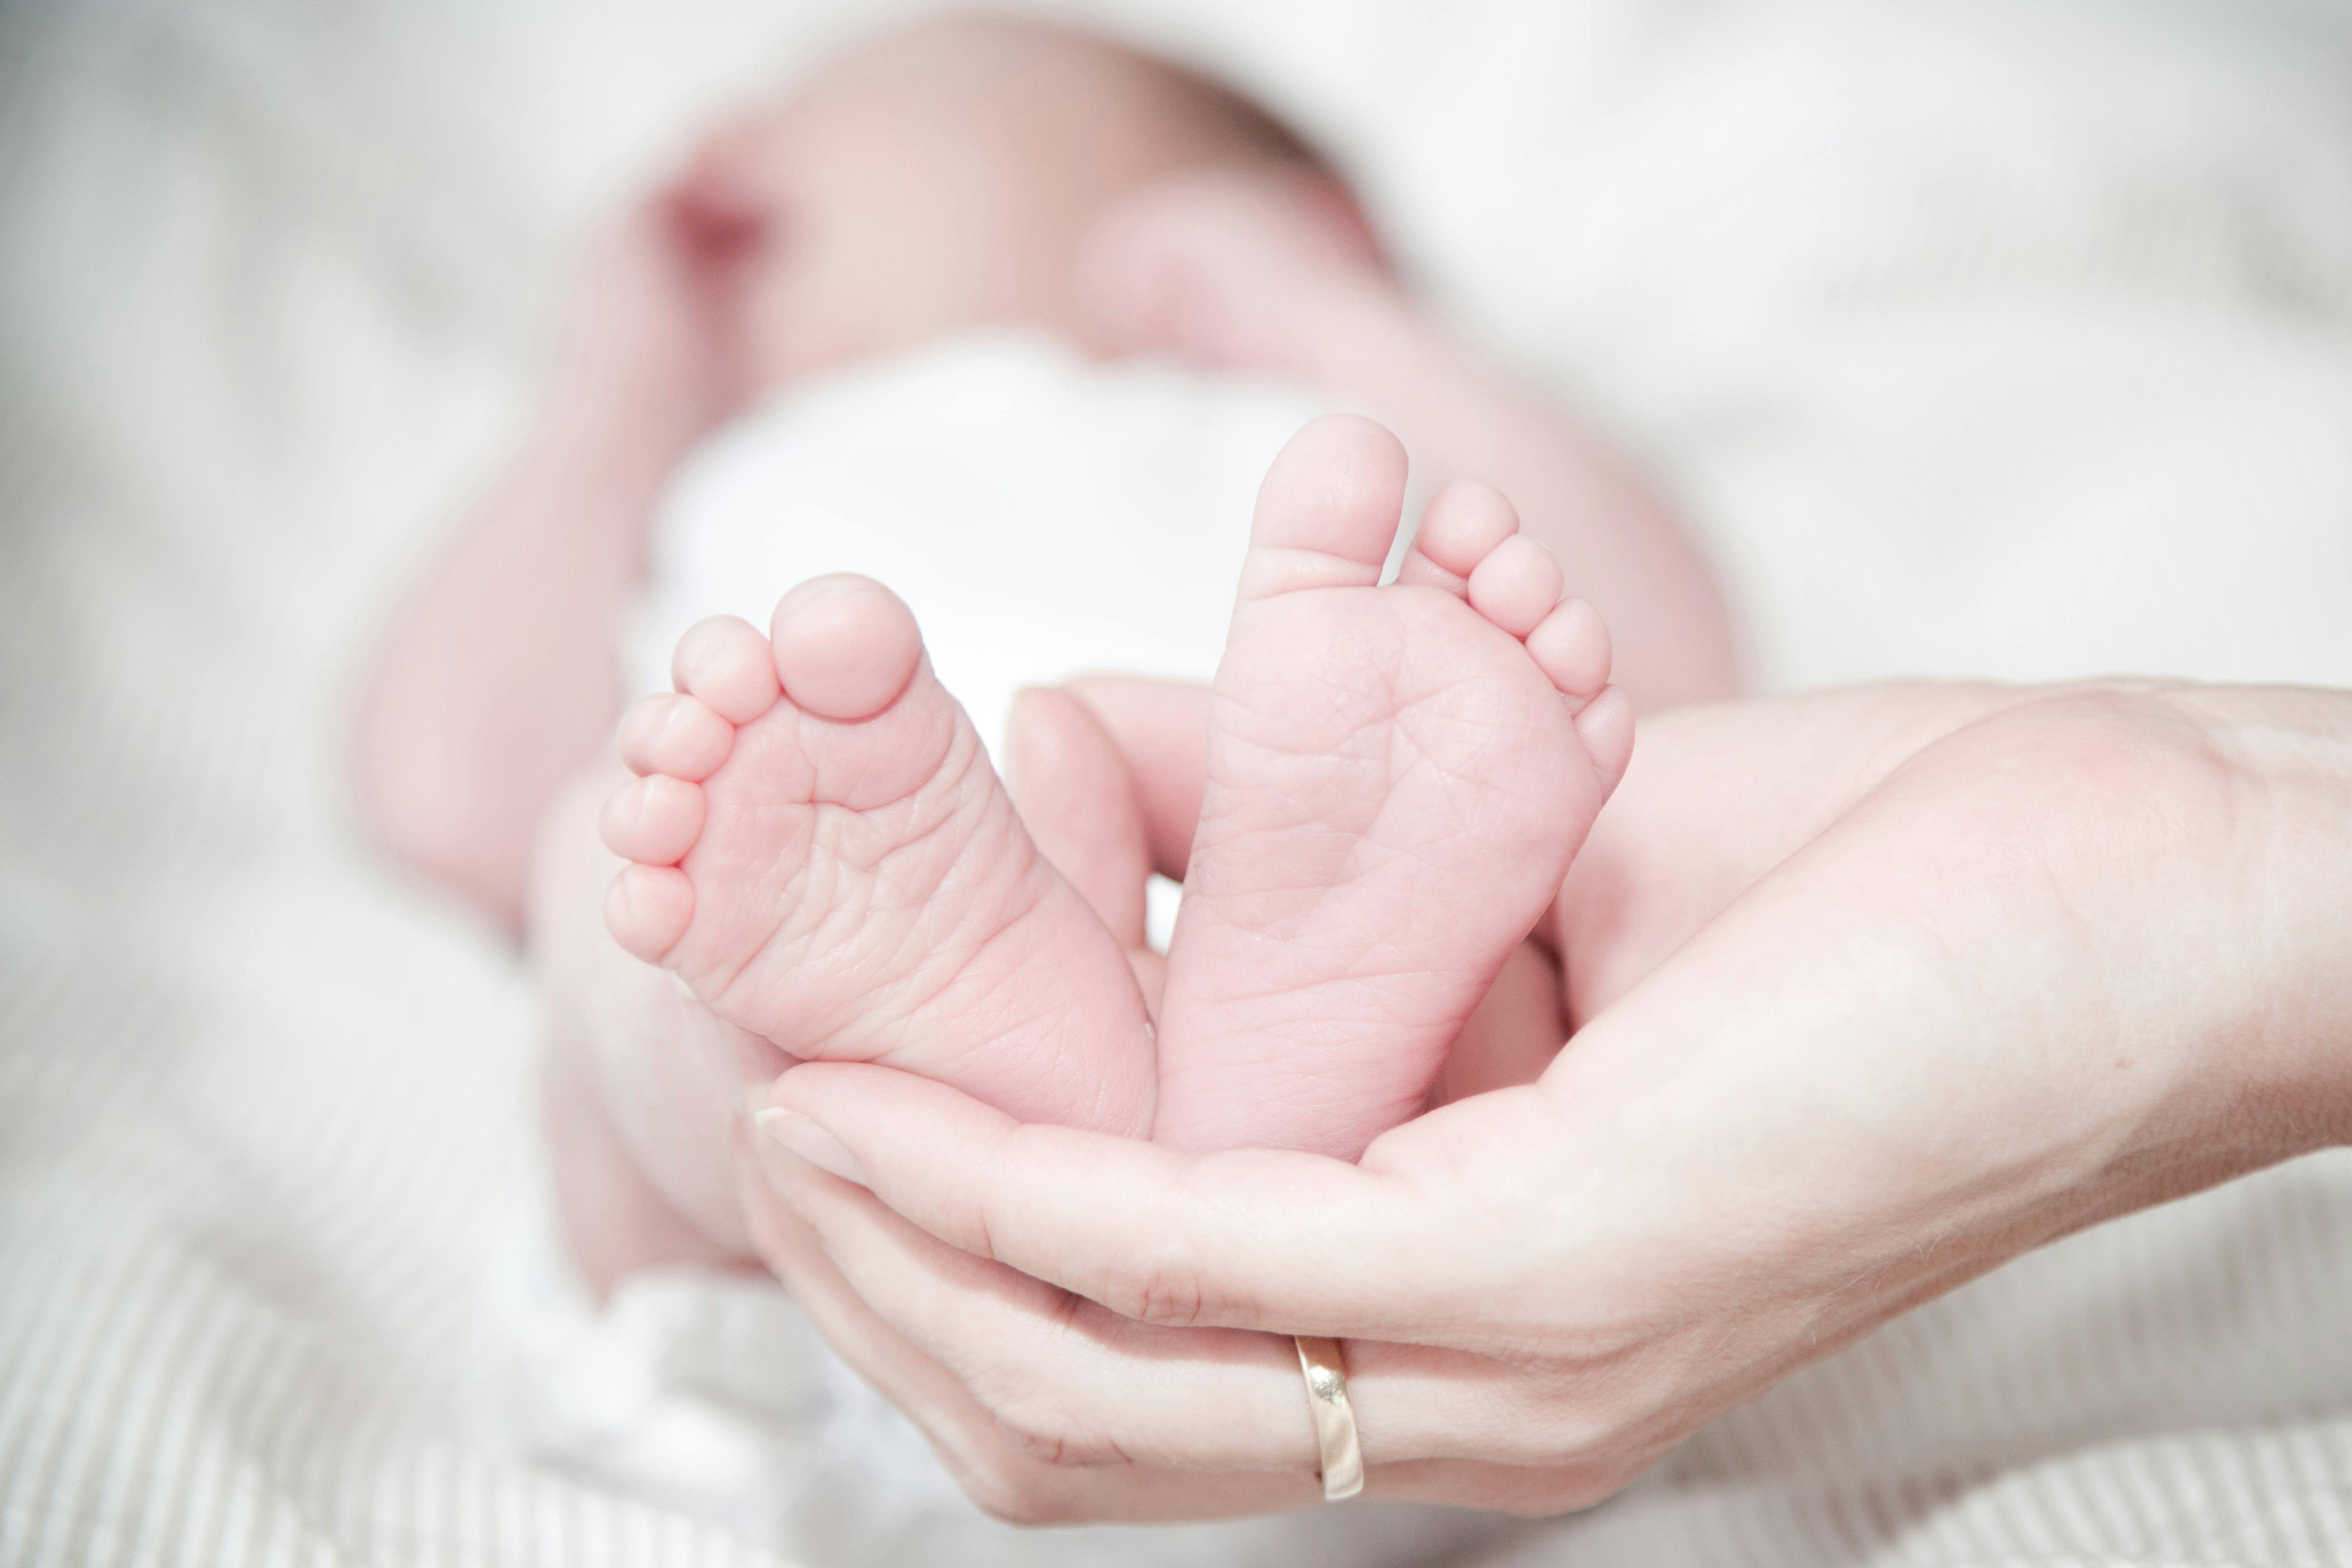 Close-up of hands holding the baby's feet. | Photo: Pexels